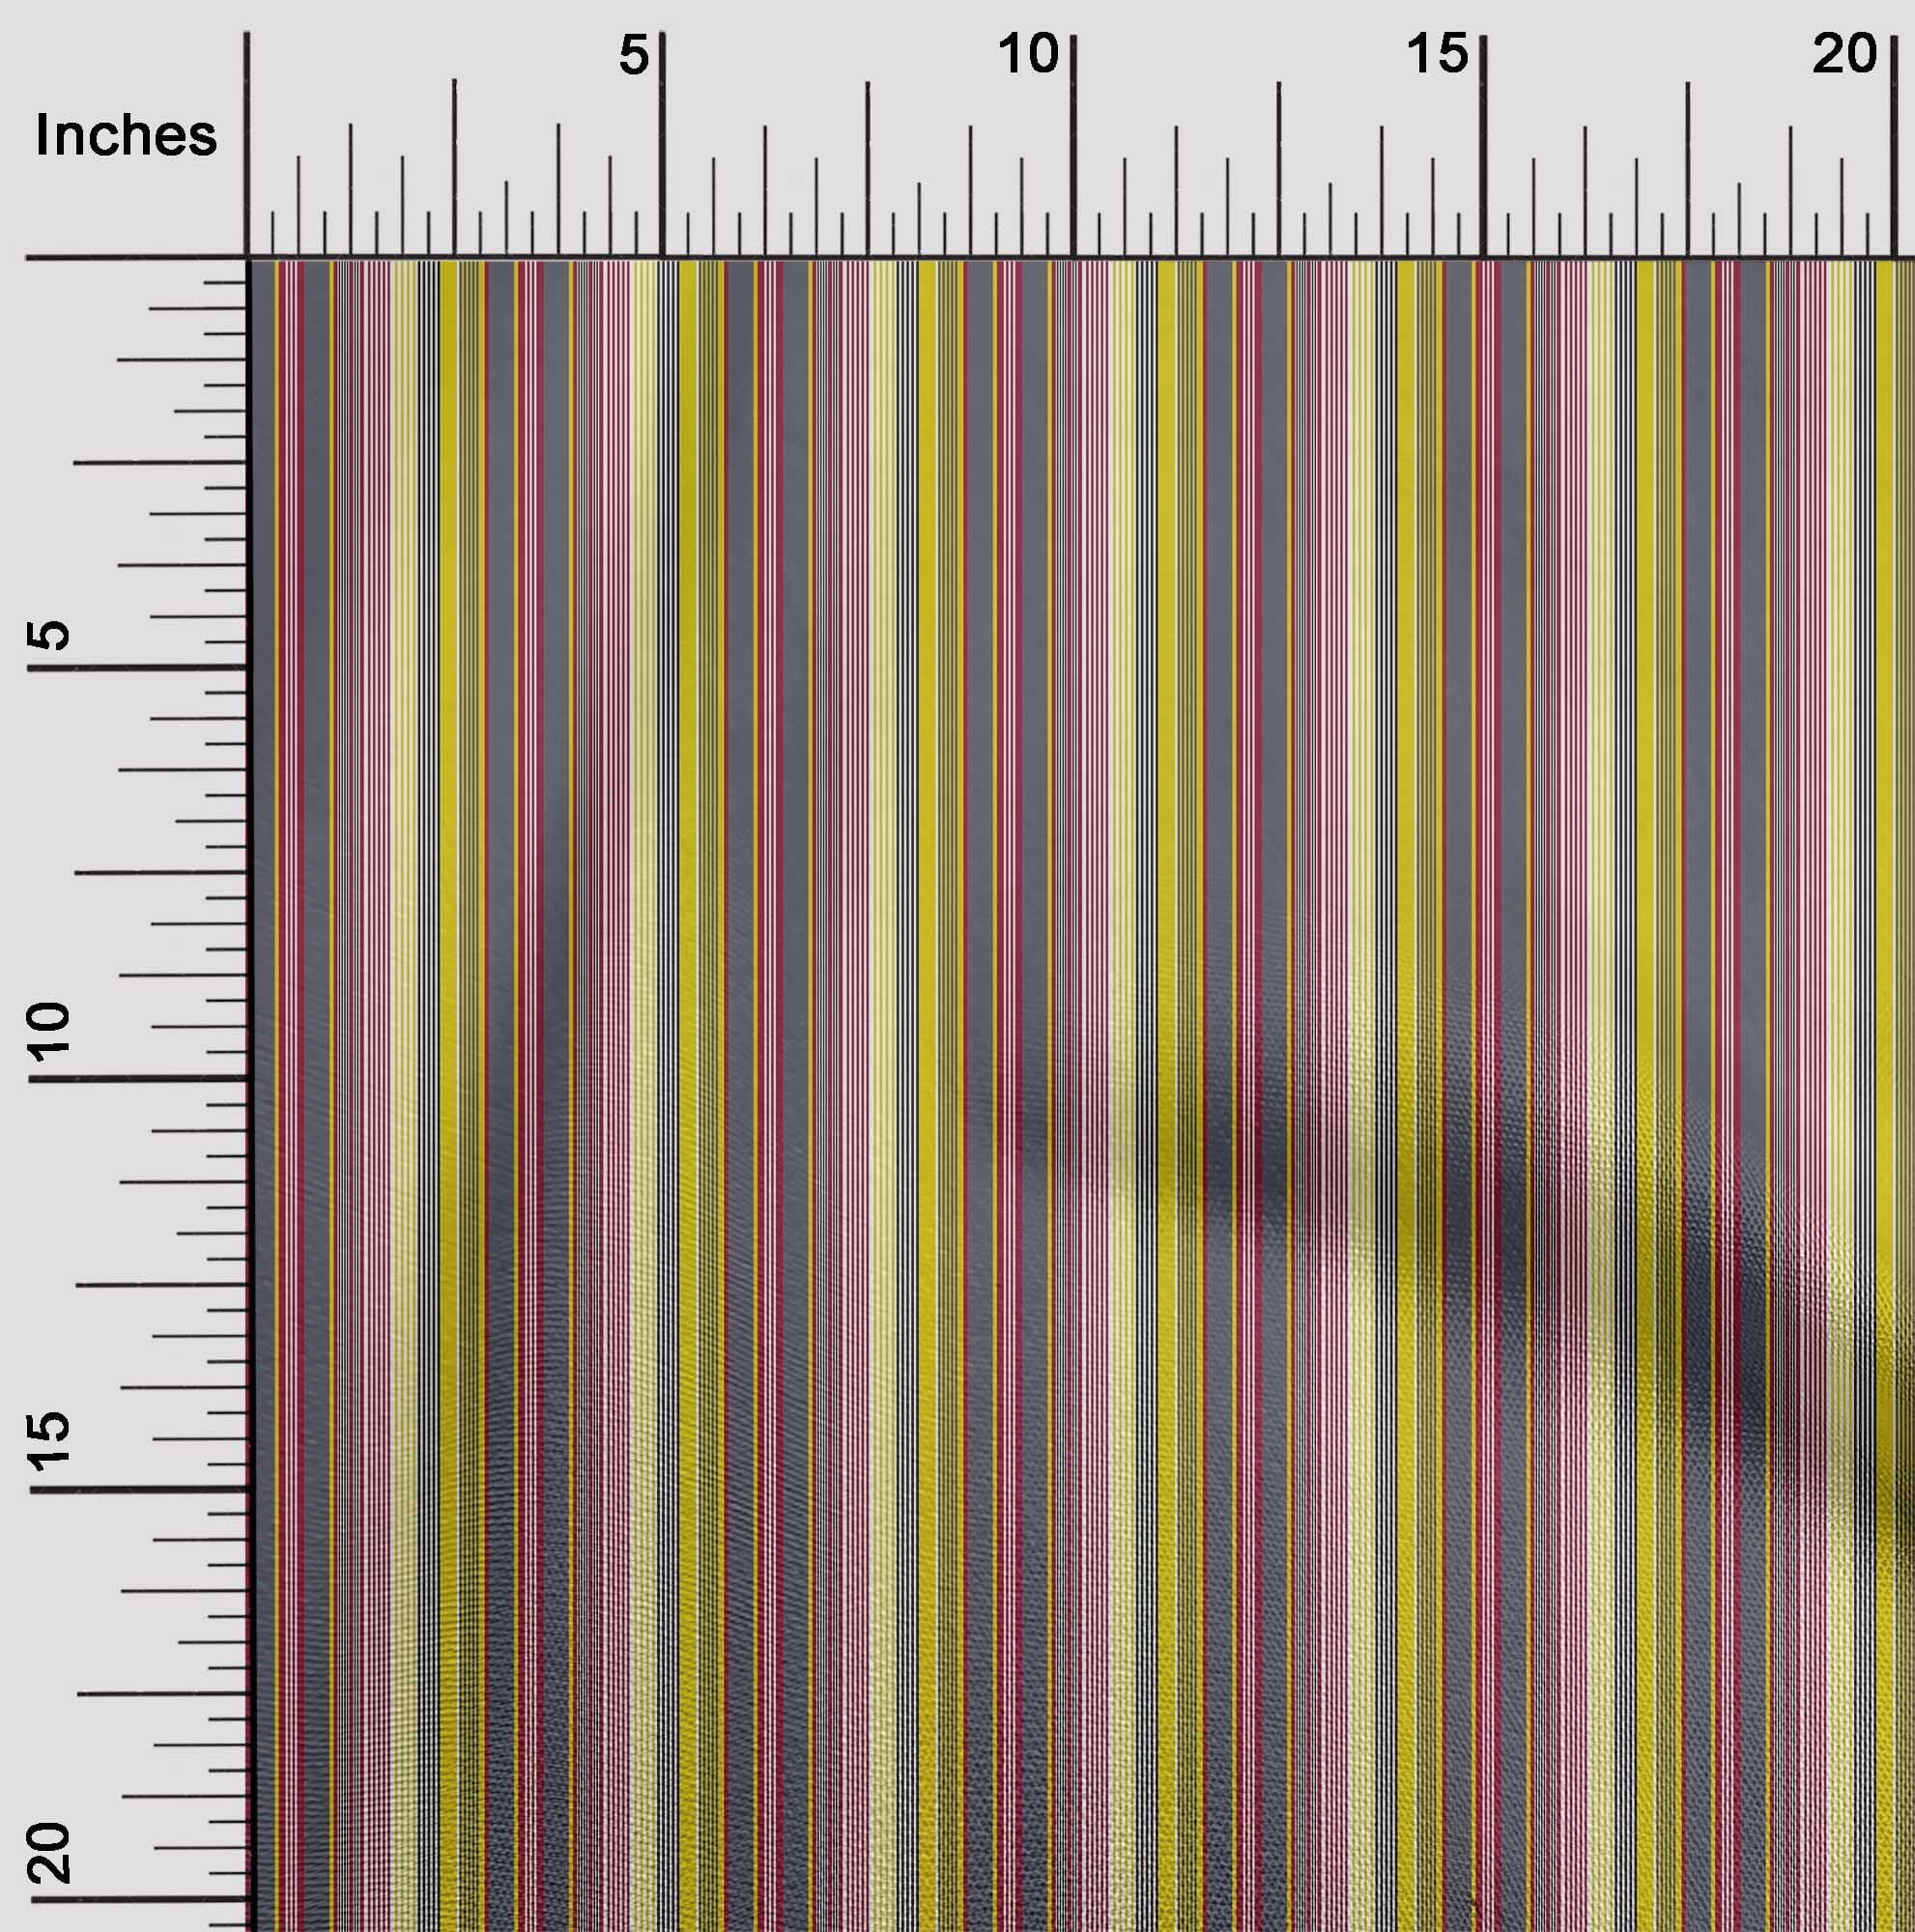 Oneoone Silk Tabby Fabric Multicolor Stripe Fabric Prints By Yard 42 Inch Wide